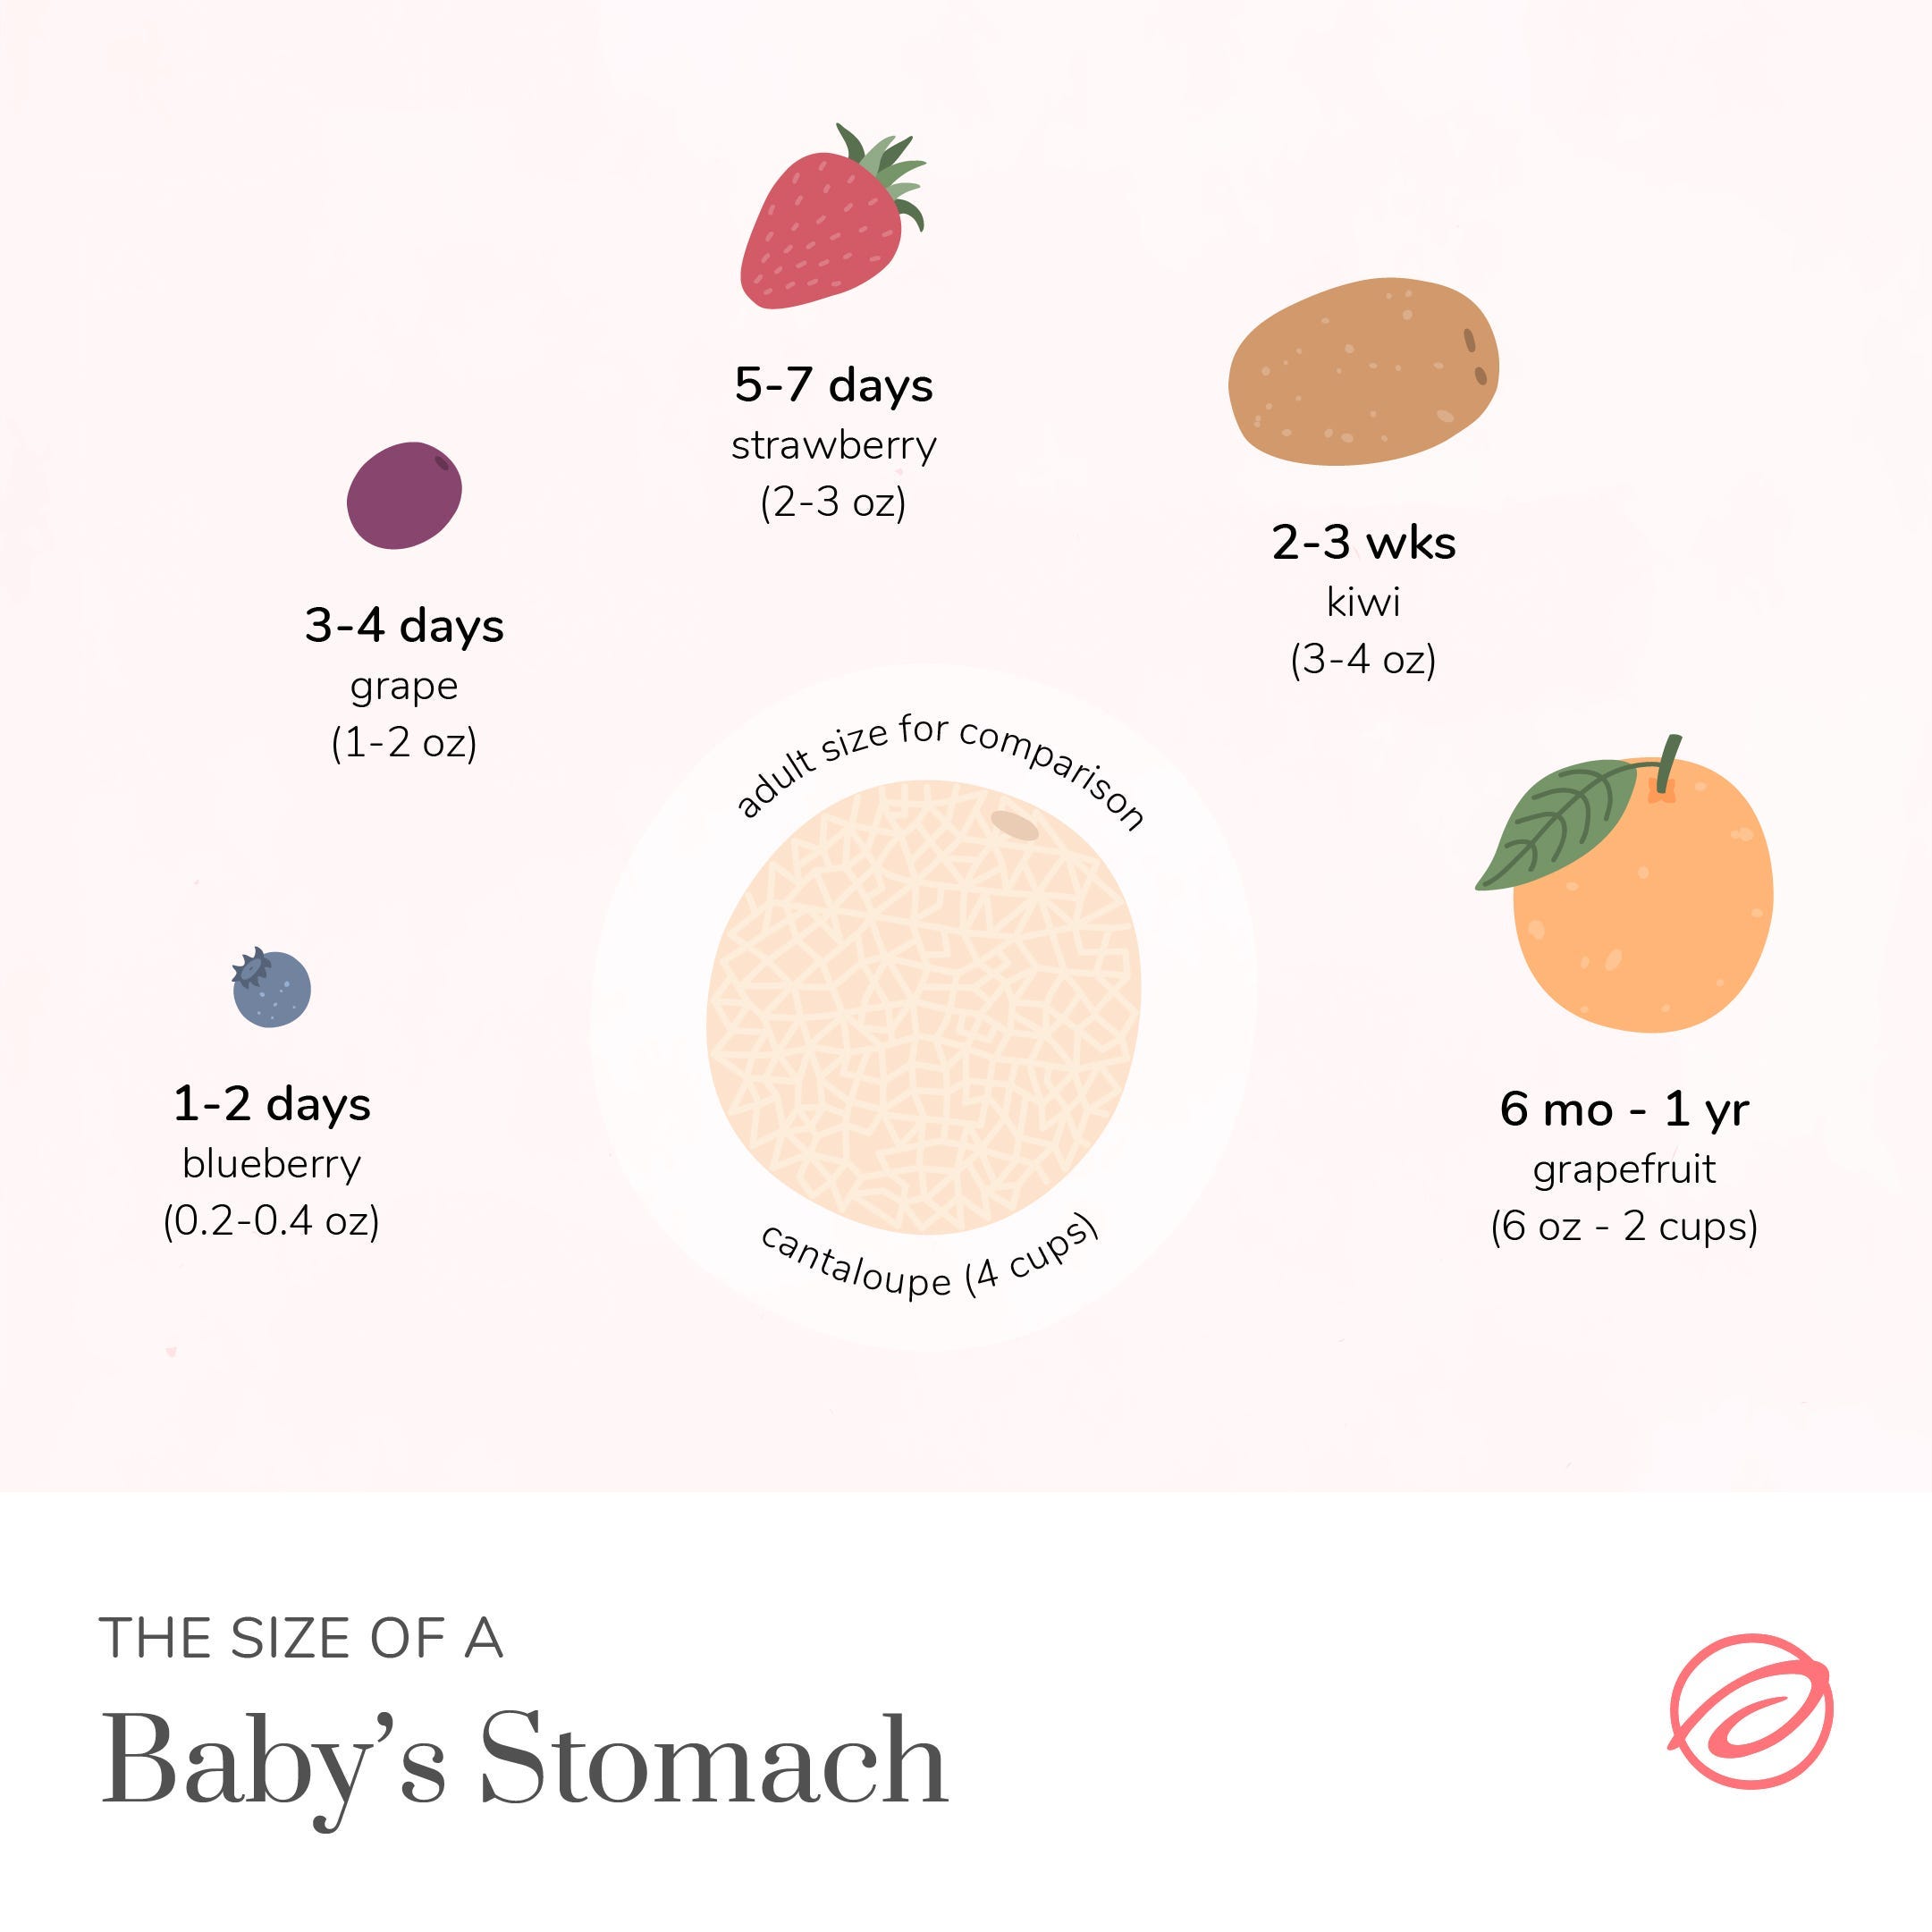 Stages of Breastfeeding Size Guide – Bodily